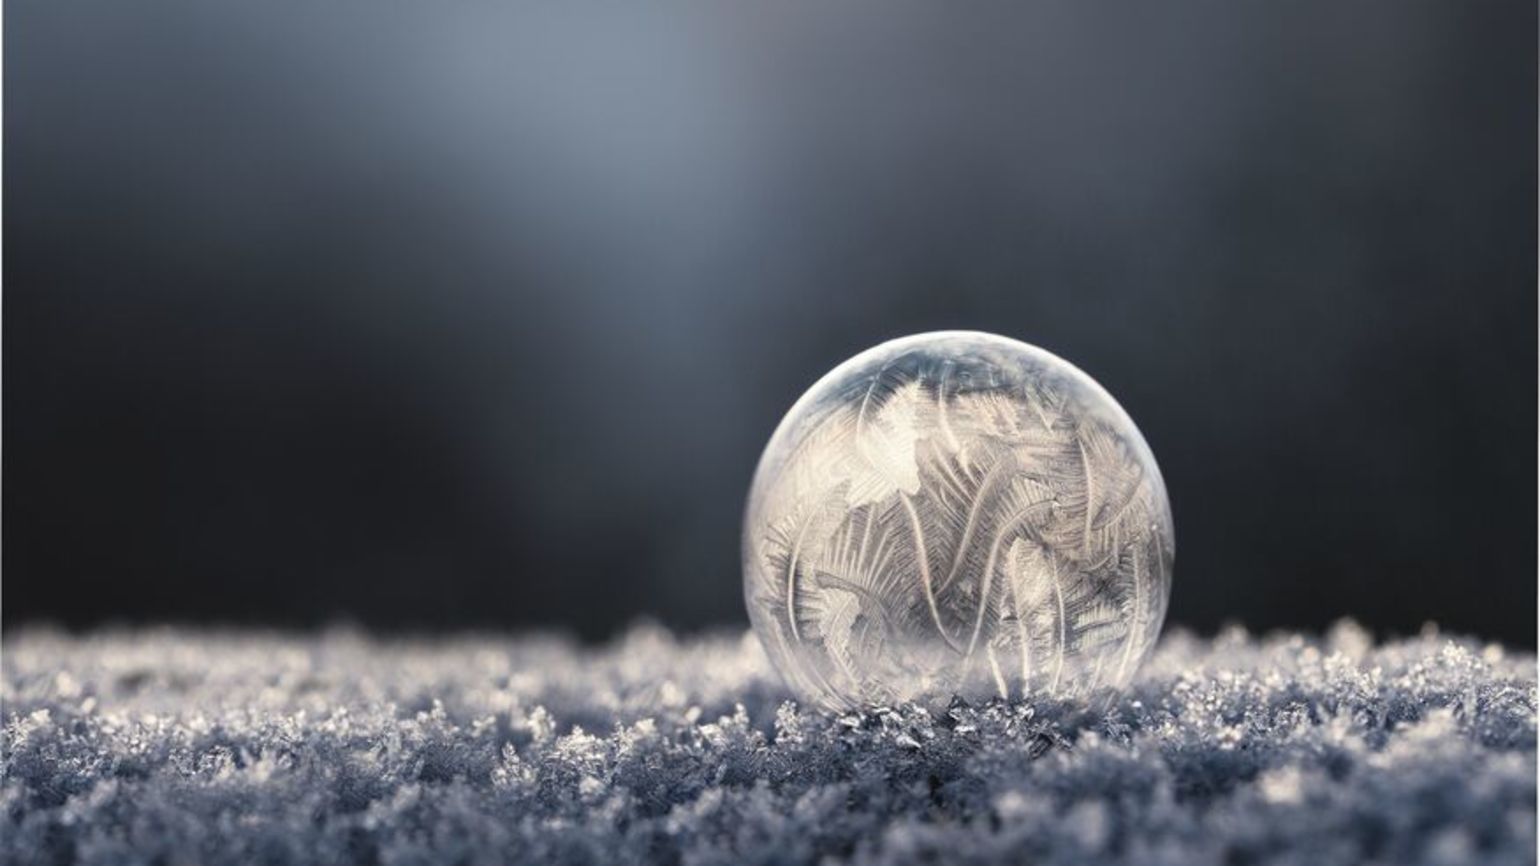 Frozen soap bubble doing positive living with an inspirational quote